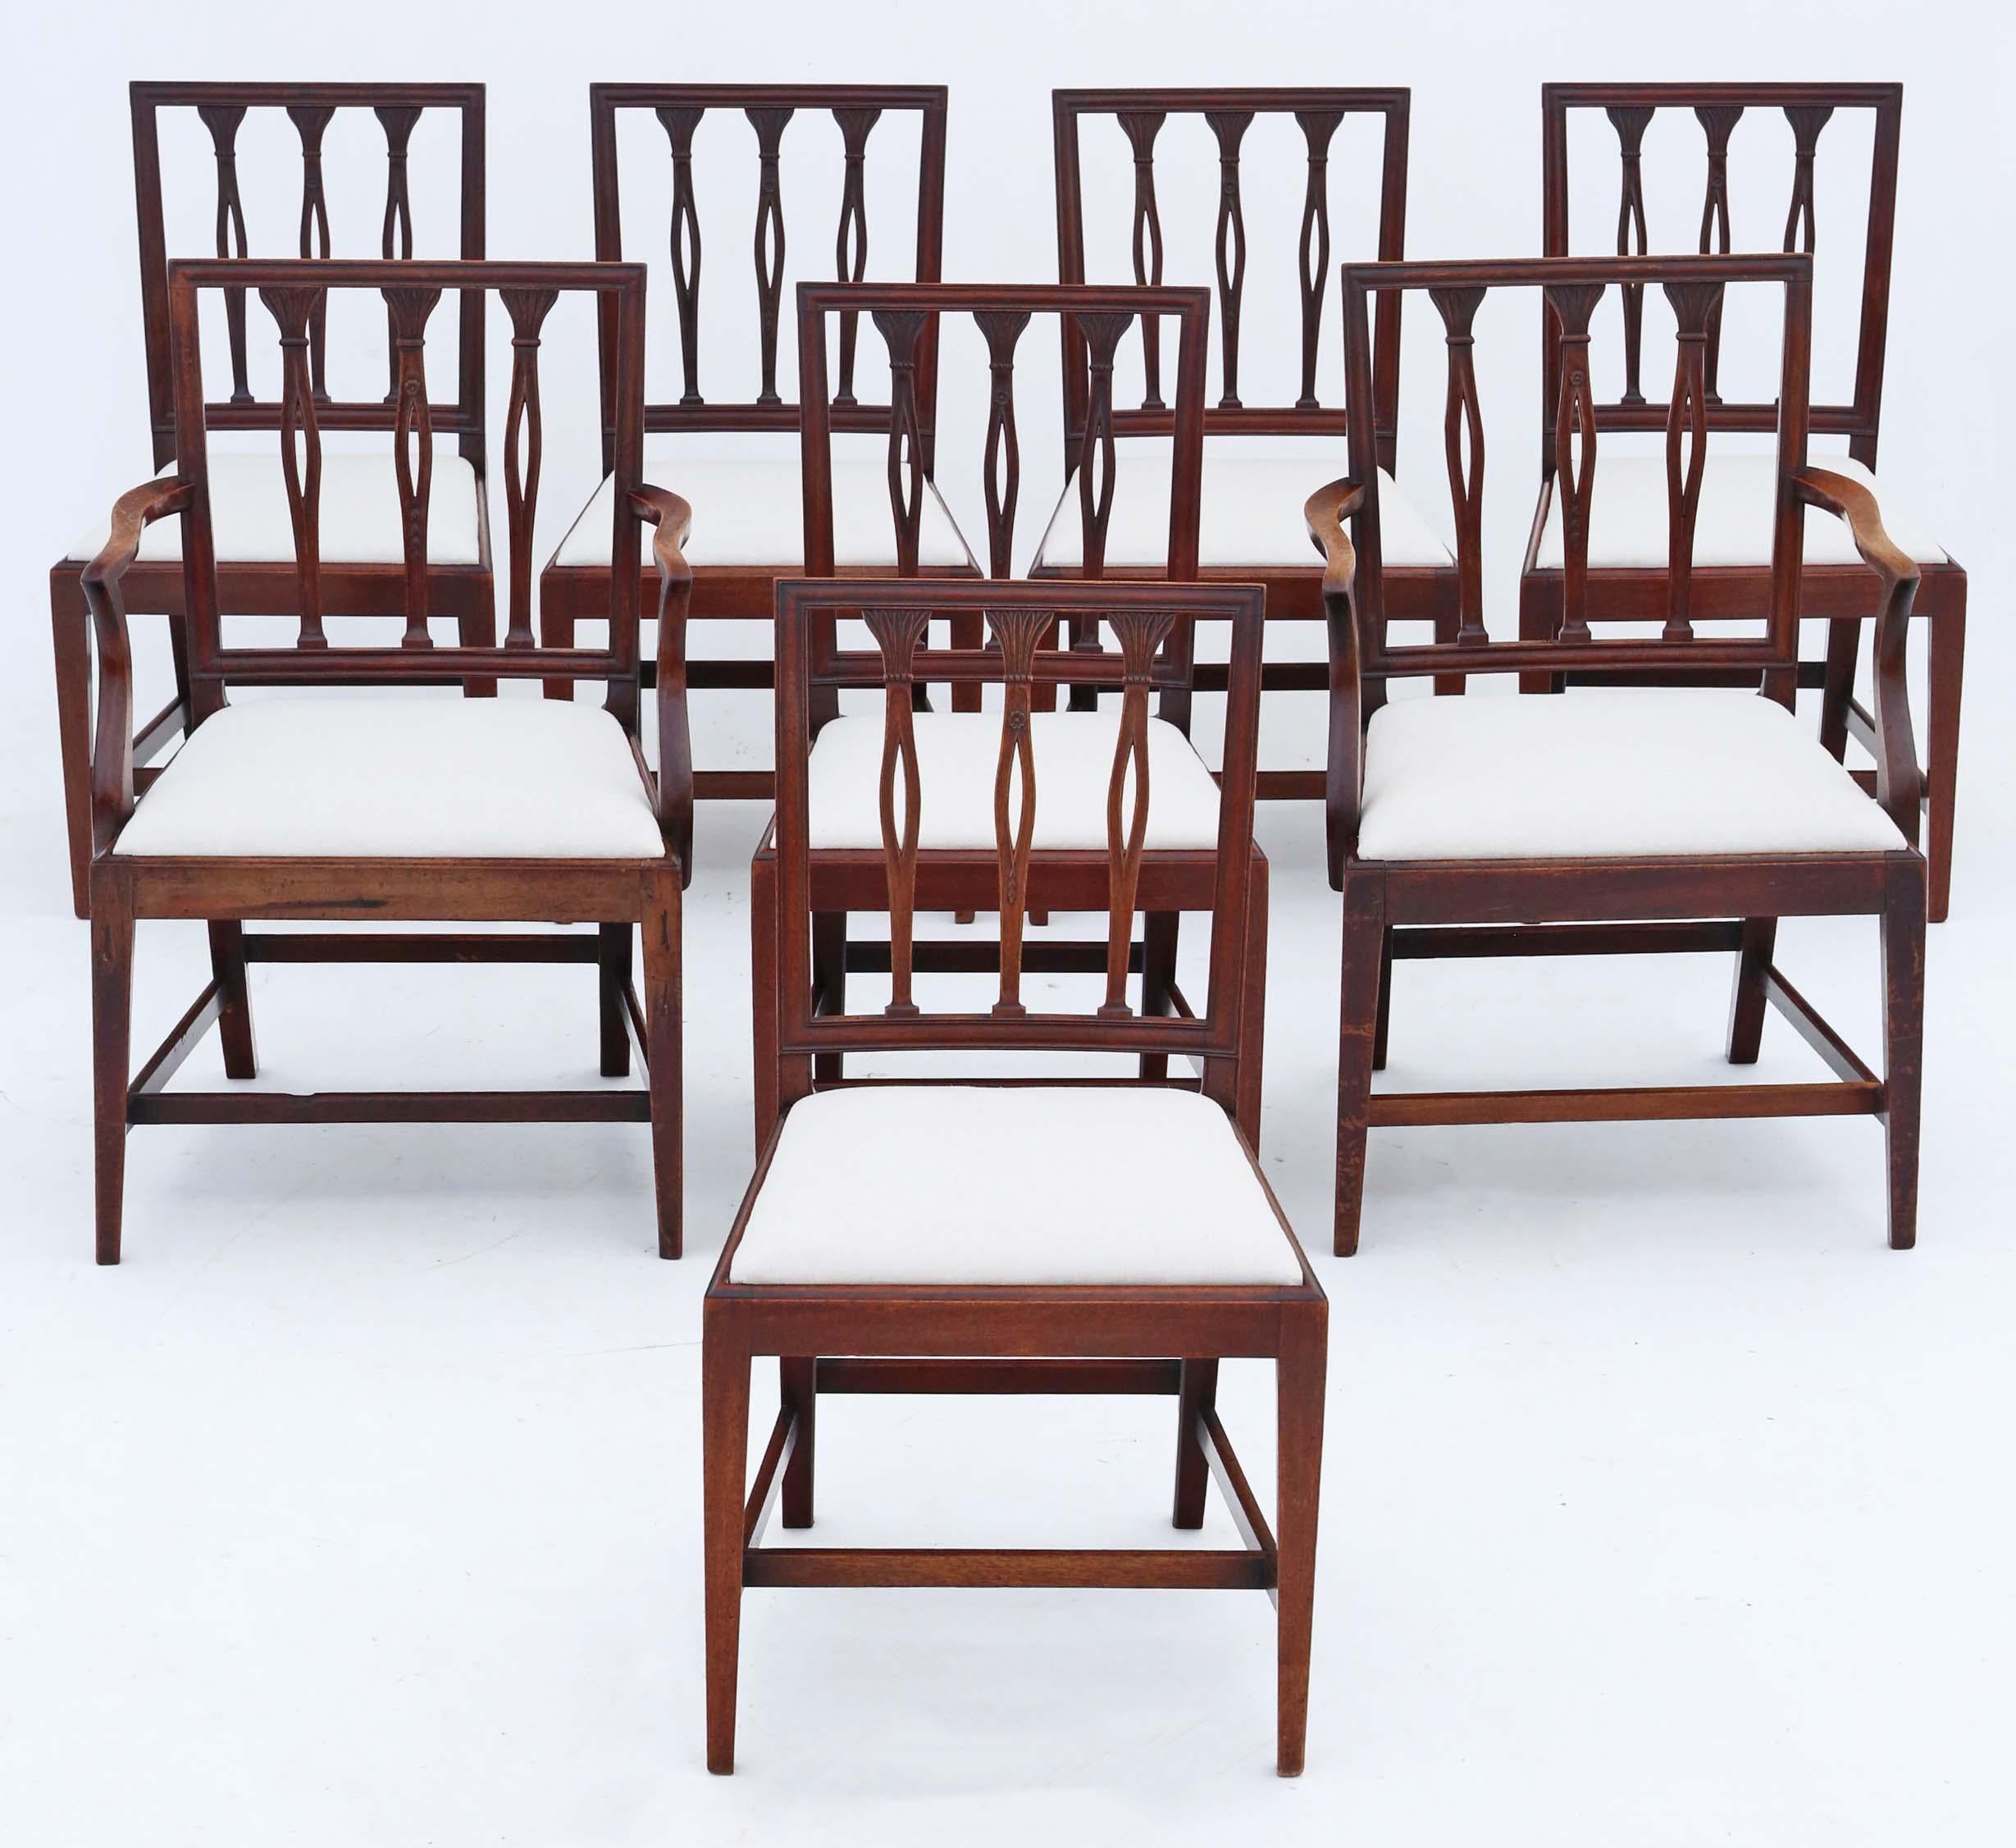 Antique fine quality set of 8 (6 + 2) Georgian mahogany dining chairs C1820.

No loose joints.

New professional upholstery.

Overall maximum dimensions:

Carver 60cmW x 59cmD x 93cmH (46cmH seat when sat on, 69cm high arms)

Chair 52cmW x